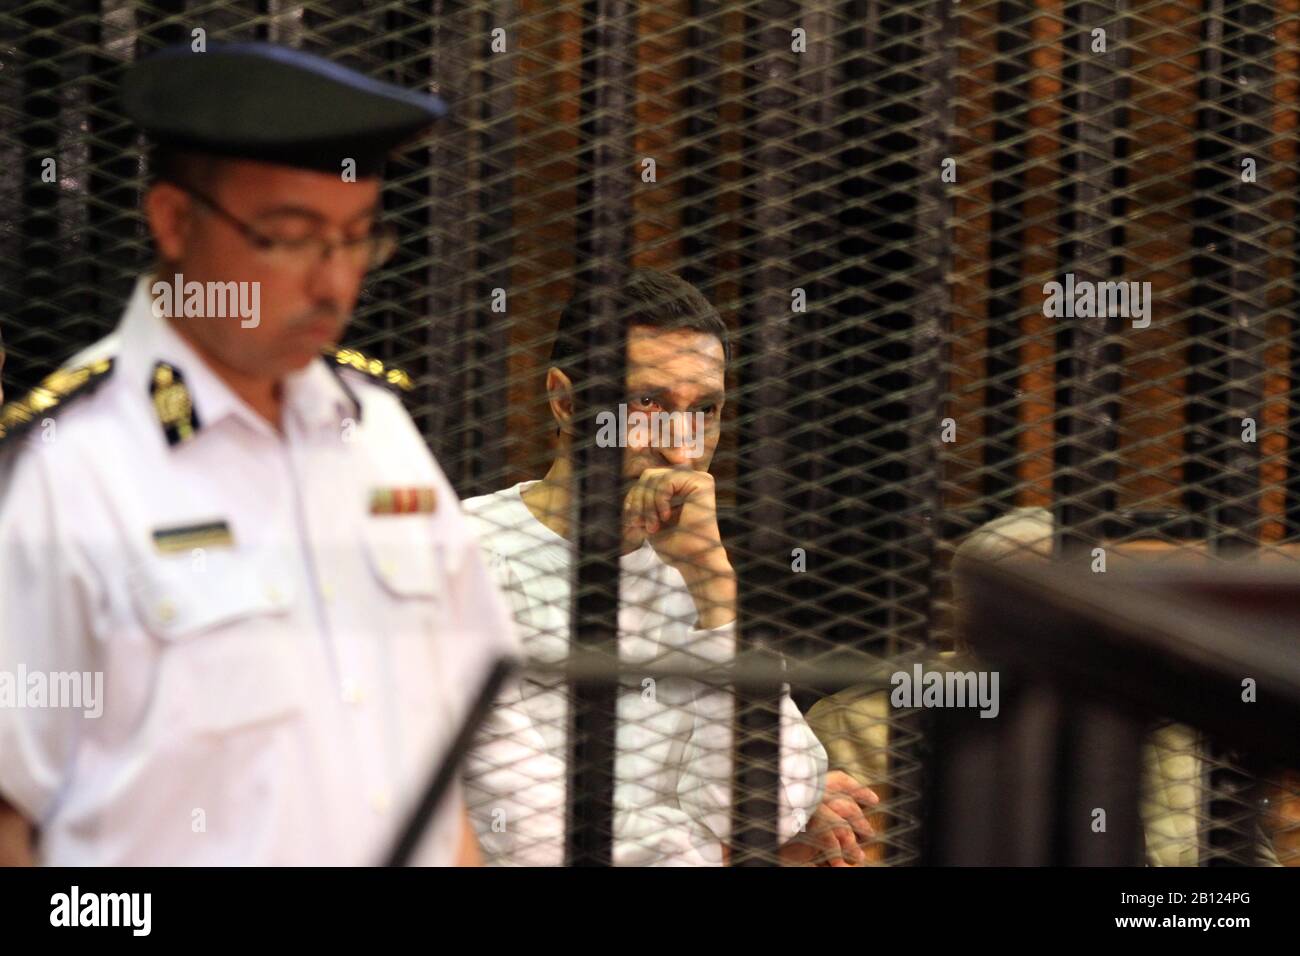 (200222) -- CAIRO, Feb. 22, 2020 (Xinhua) -- File photo taken on July 9, 2012 shows Alaa Mubarak (C), son of ousted Egyptian president Mohamed Hosni Mubarak, in a court in Cairo, Egypt. An Egyptian court acquitted on Saturday Alaa and Gamal Mubarak, the sons of ousted Egyptian president Mohamed Hosni Mubarak, in a corruption case, state-run Ahram Online news website reported. (Xinhua/Ahmed Gomaa) Stock Photo